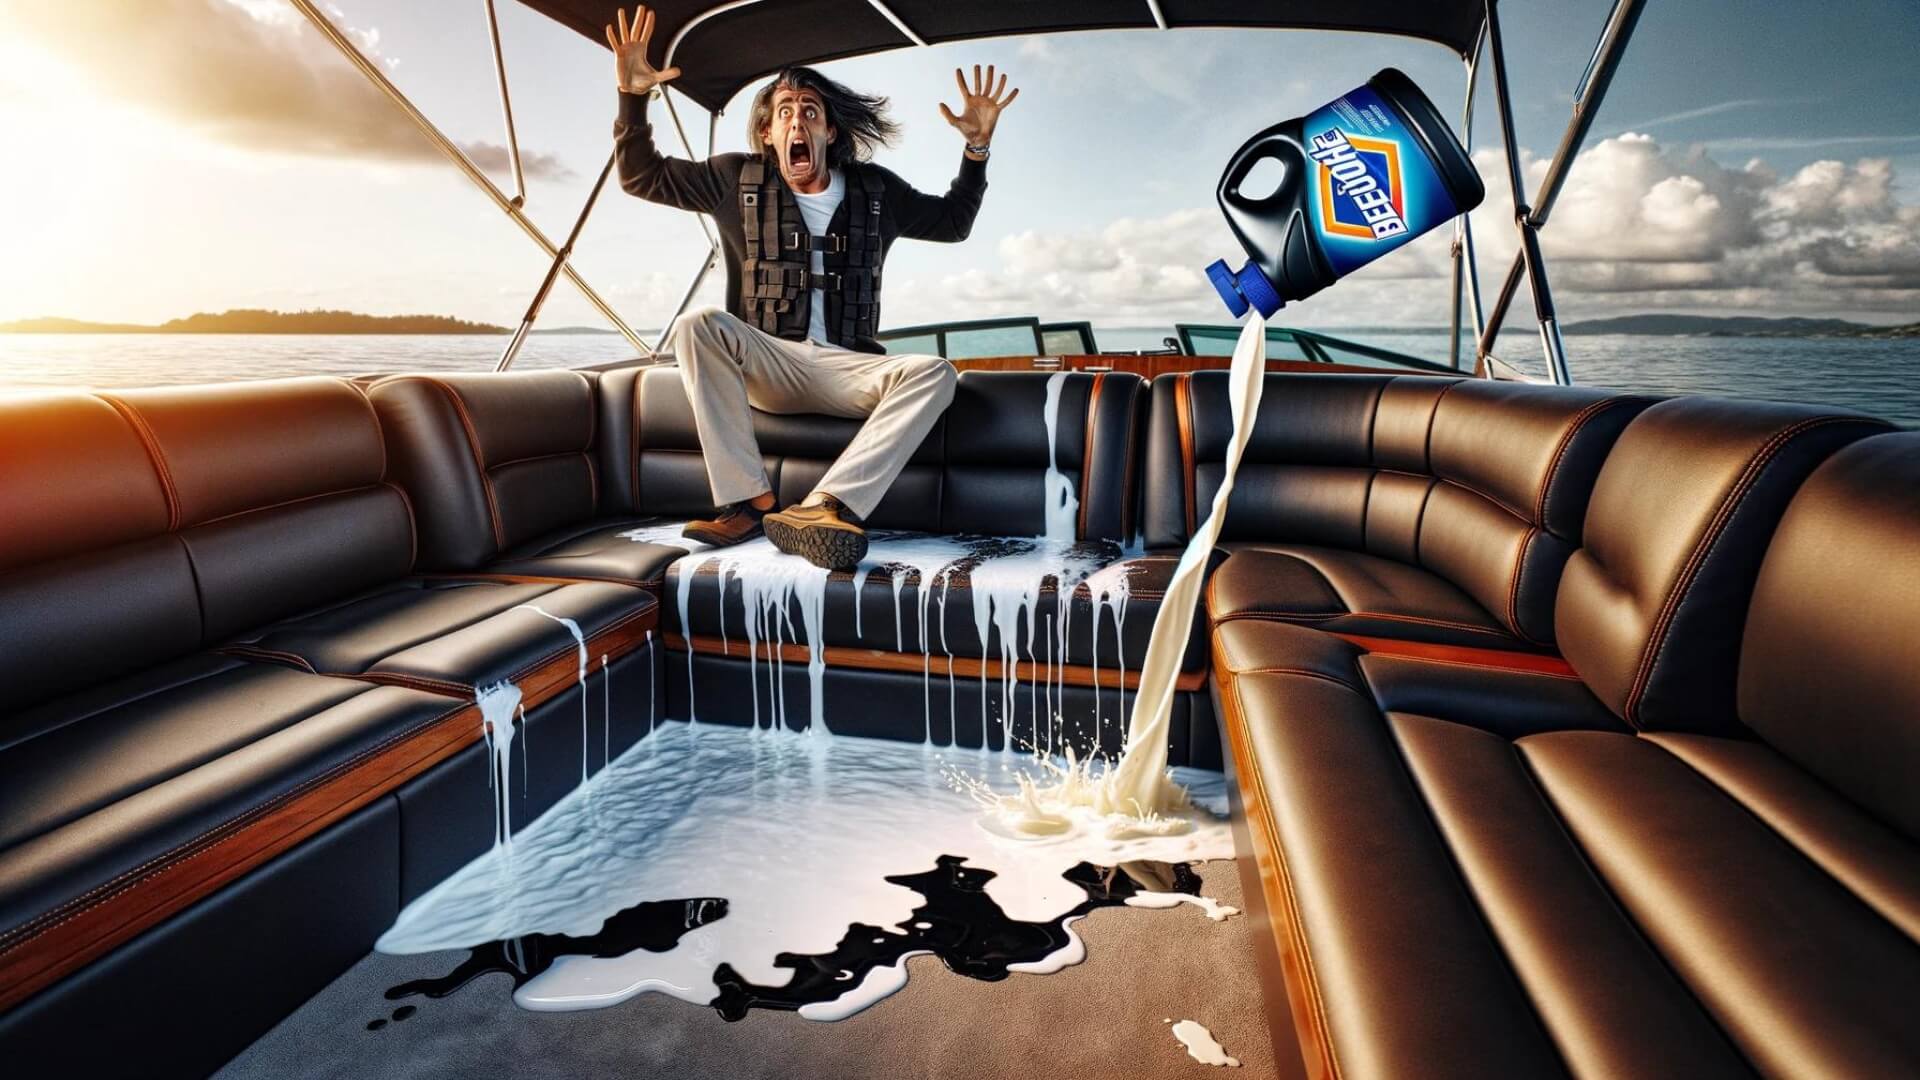 a man panics after spilling bleach on his leather boat seats